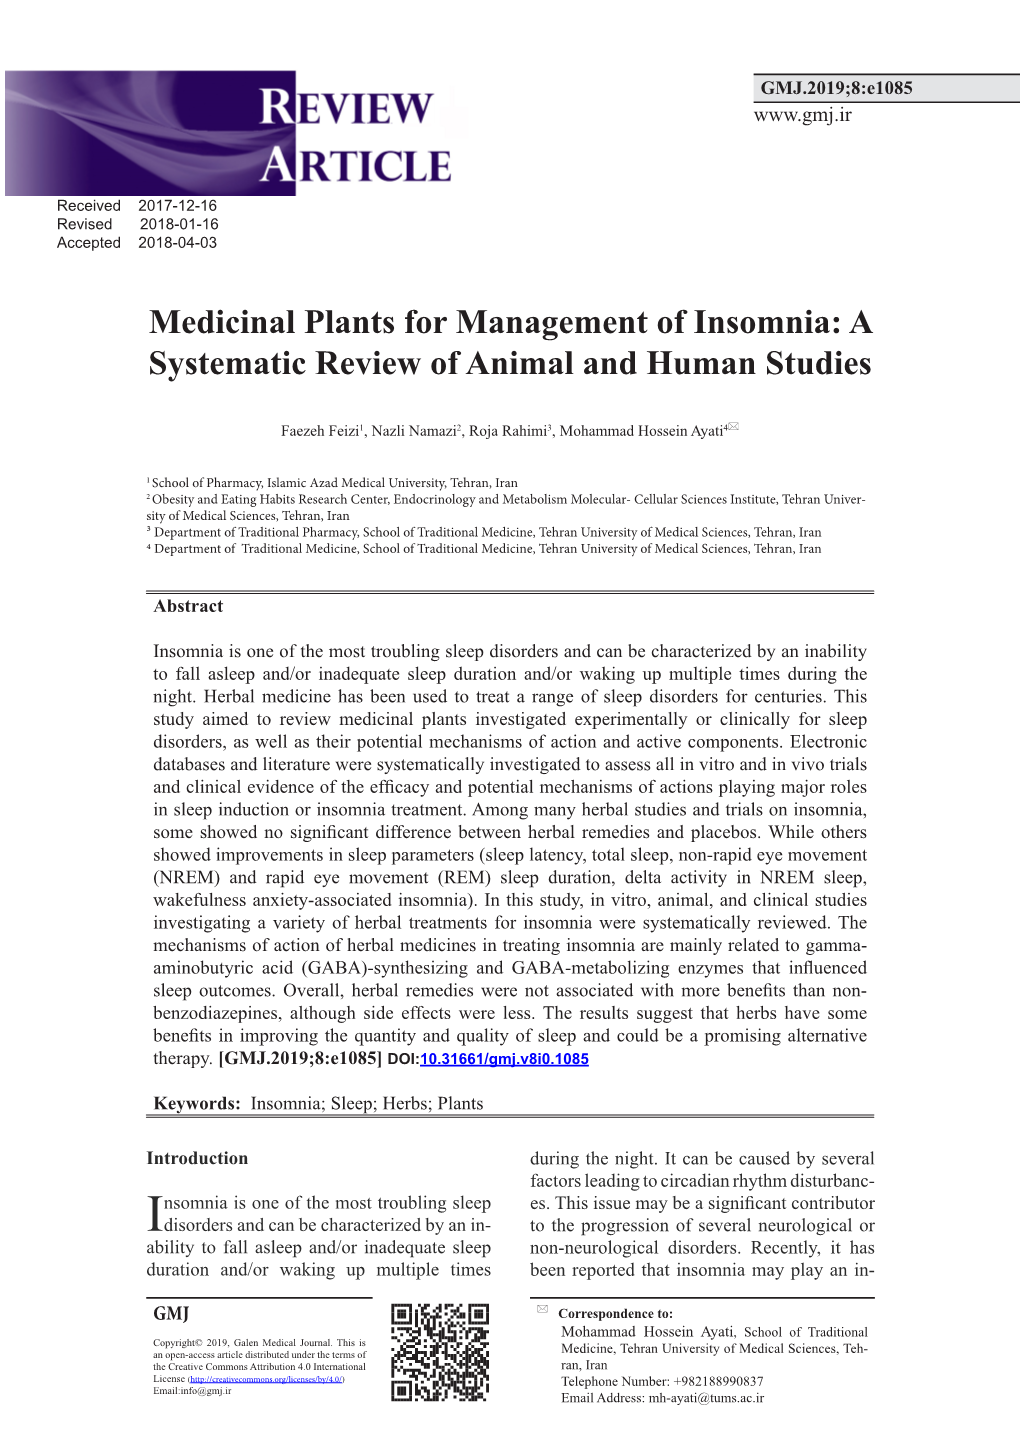 Medicinal Plants for Management of Insomnia: a Systematic Review of Animal and Human Studies